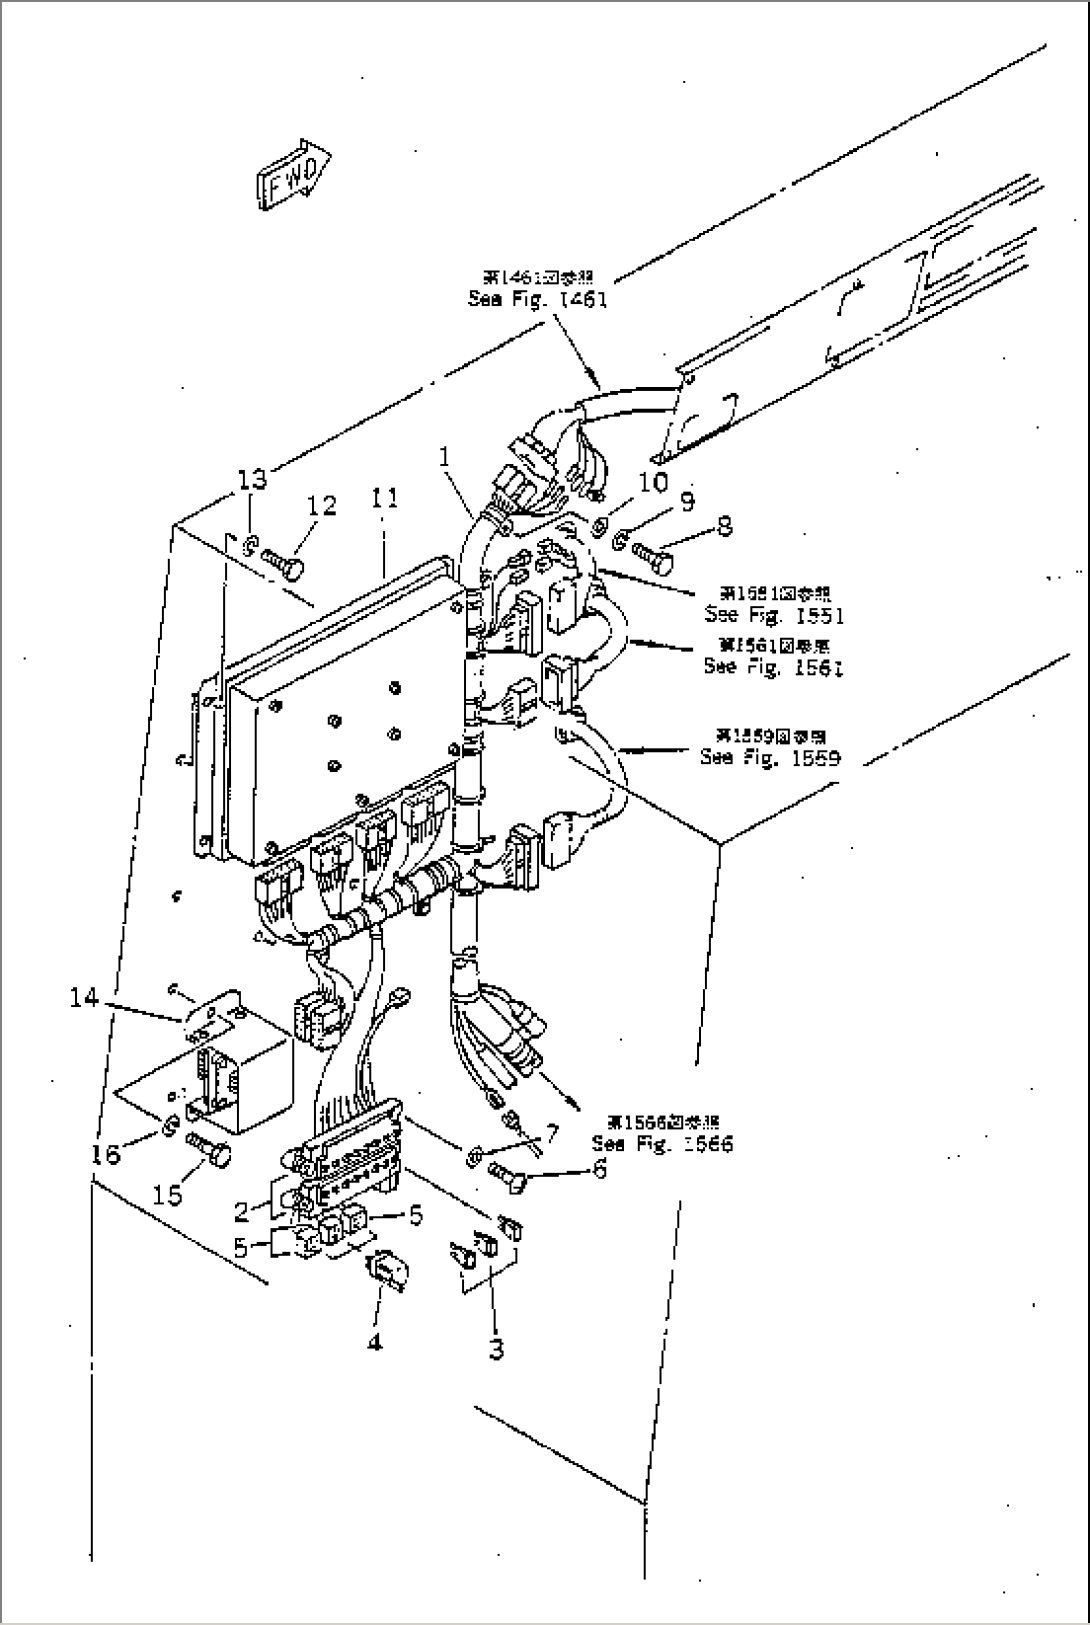 ELECTRICAL SYSTEM (UPPER MDT BOX LINE) (FOR ISO PATTERN)